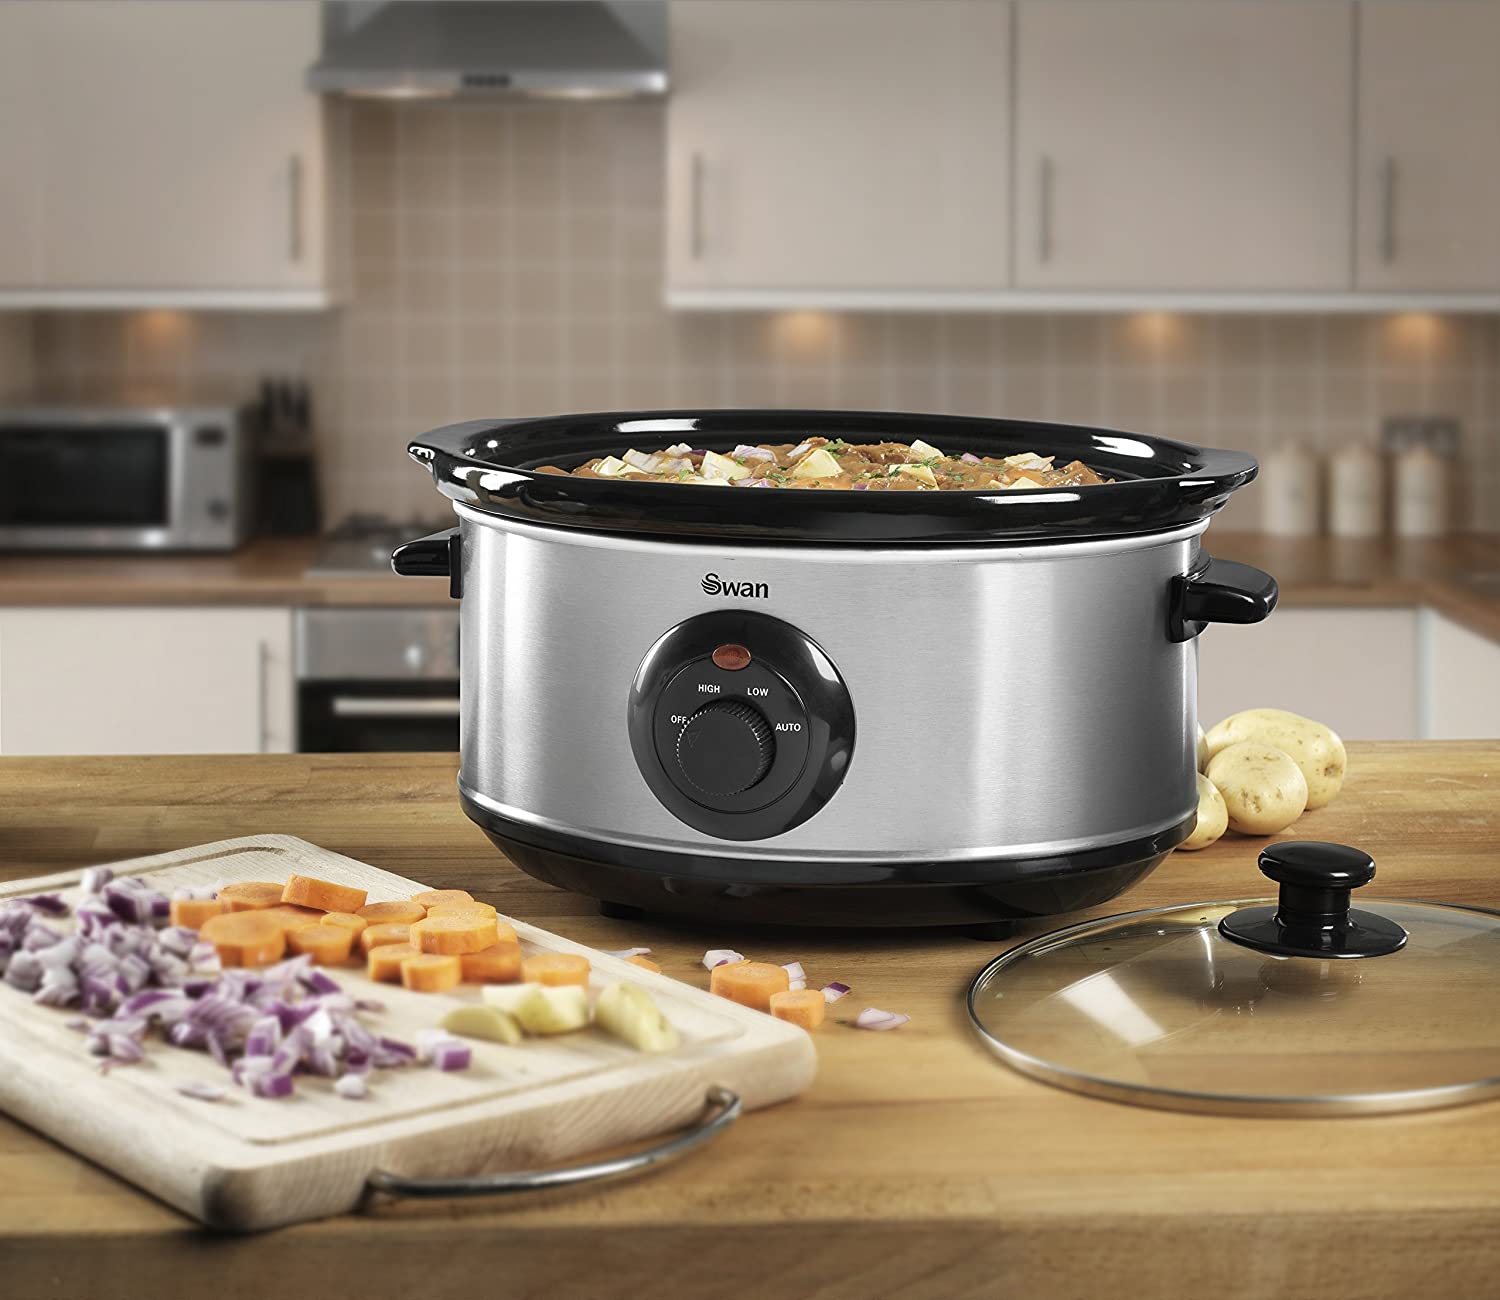 Swan 3.5 Litre Oval Stainless Steel Slow Cooker with 3 Cooking Settings, 200W, Silver